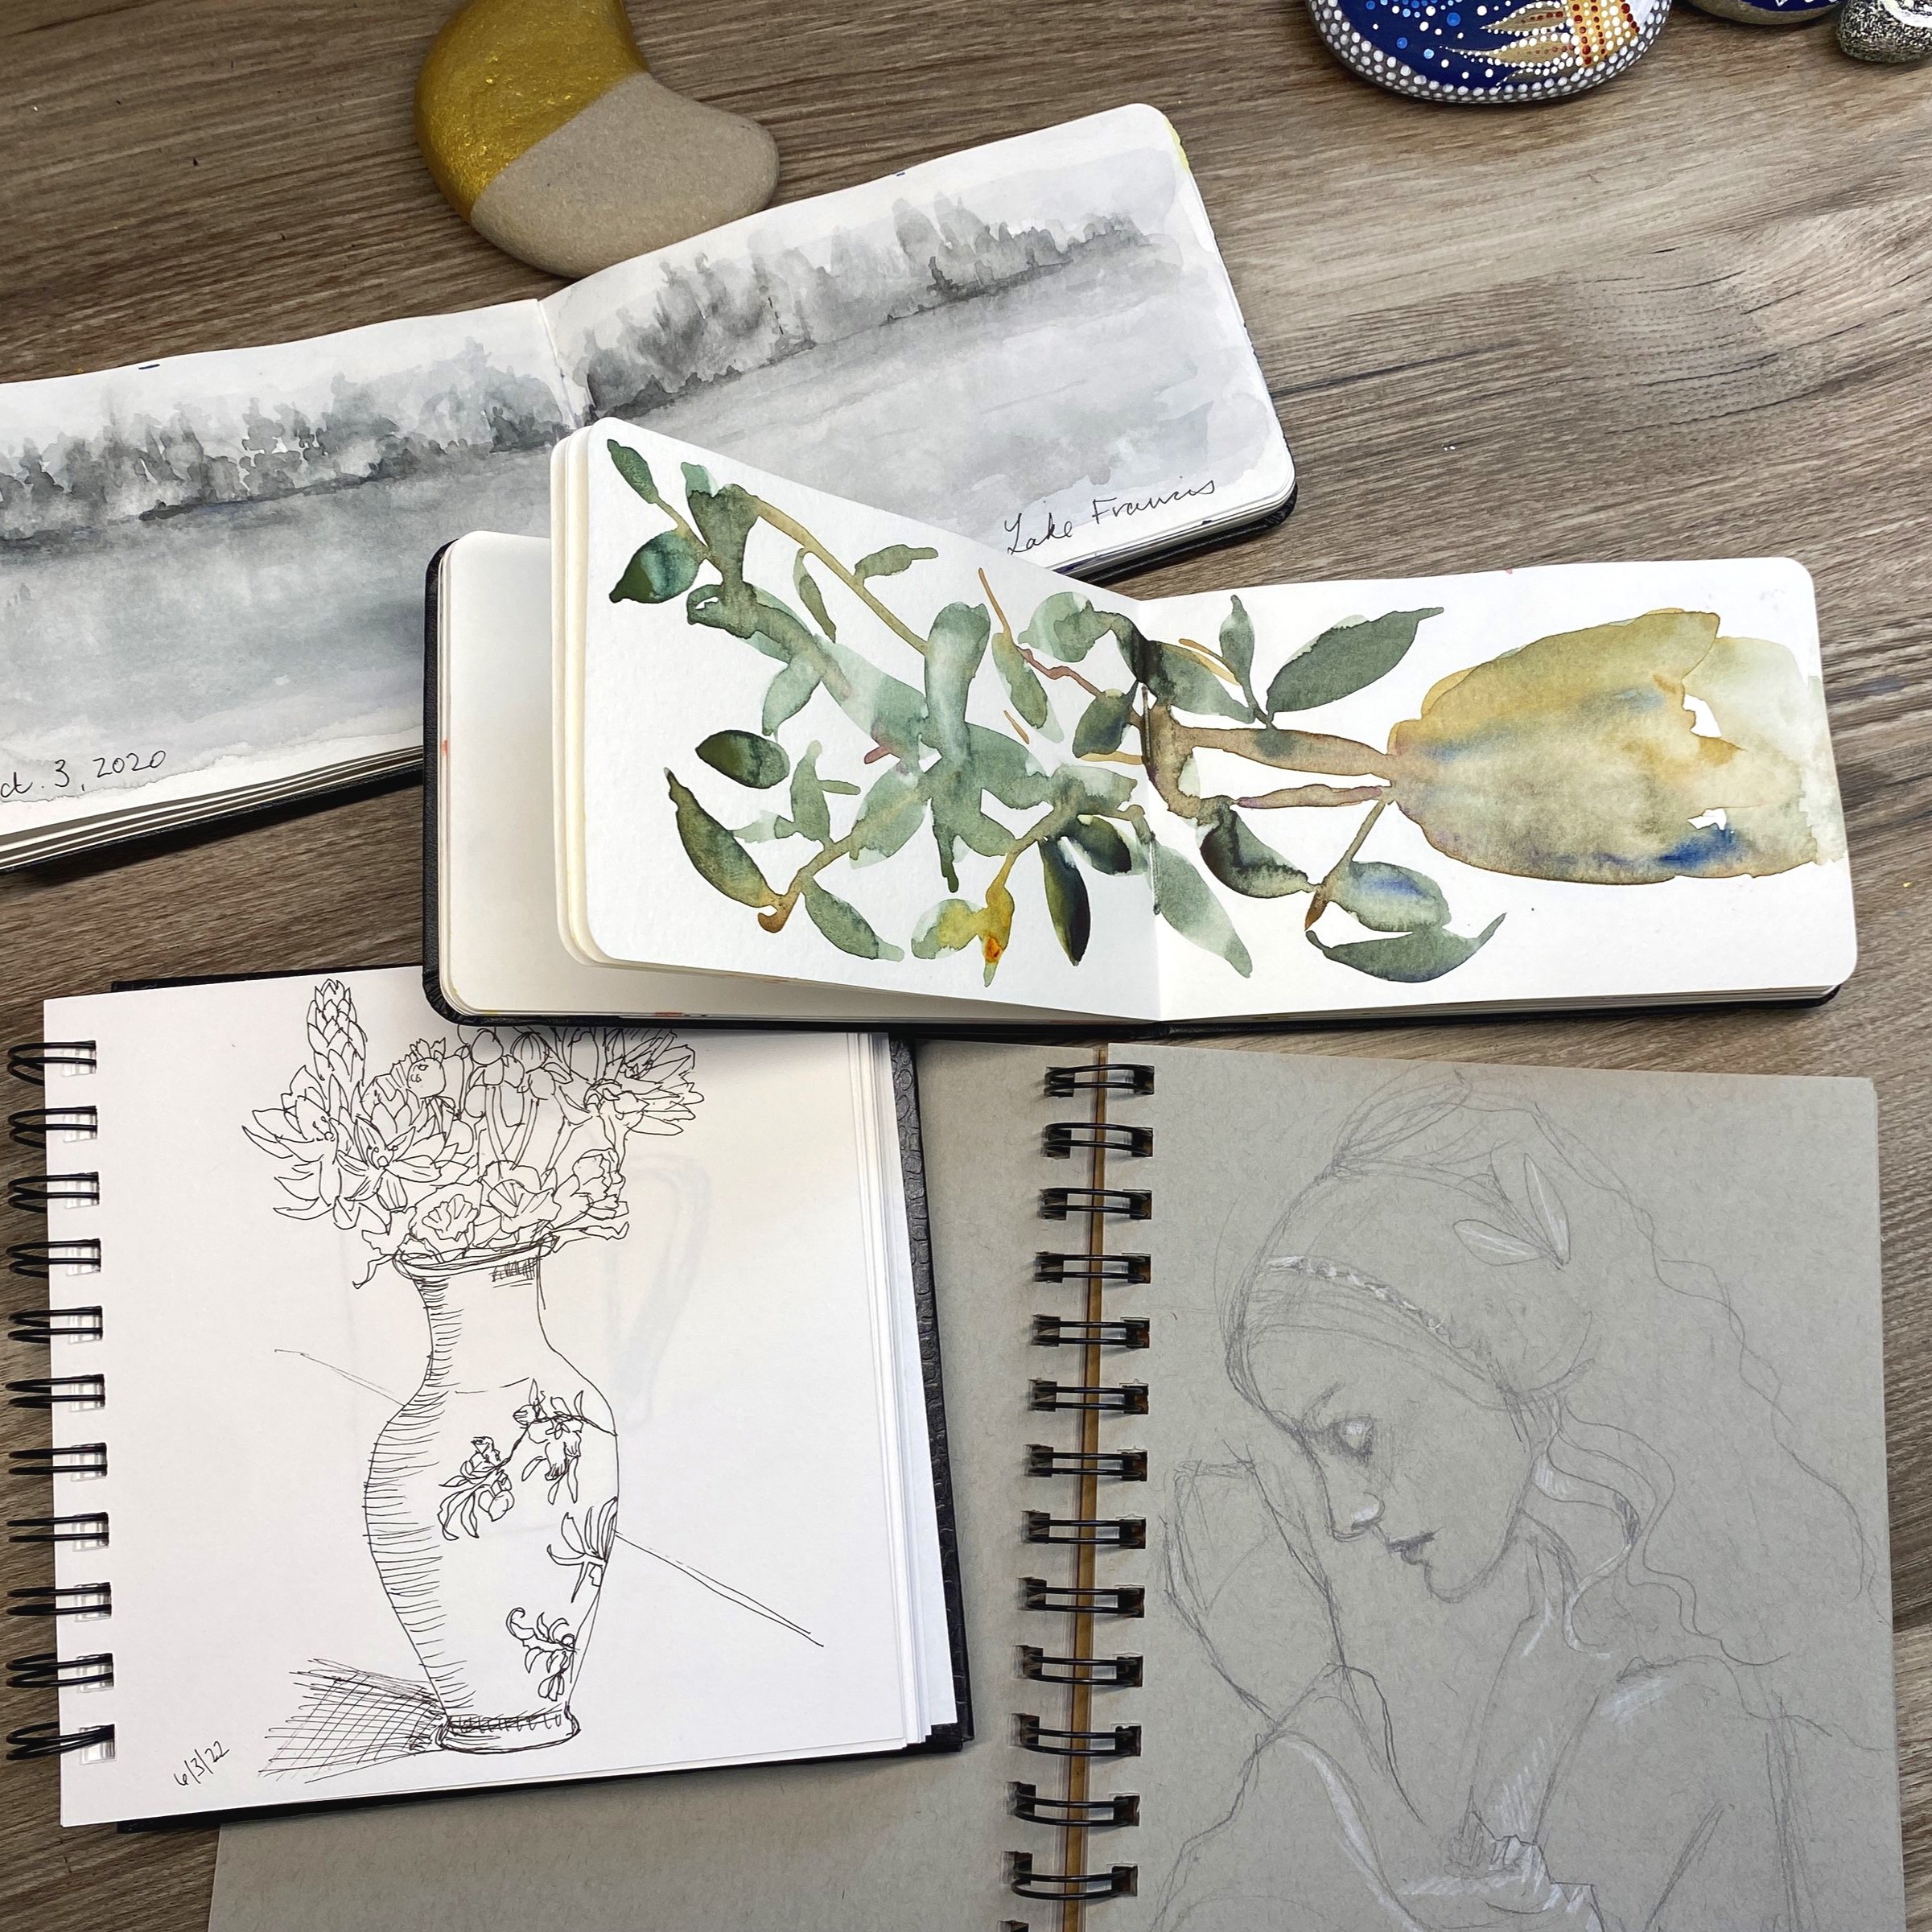 Sketchbooks and Journals and Art…Oh my! — Art by Monica